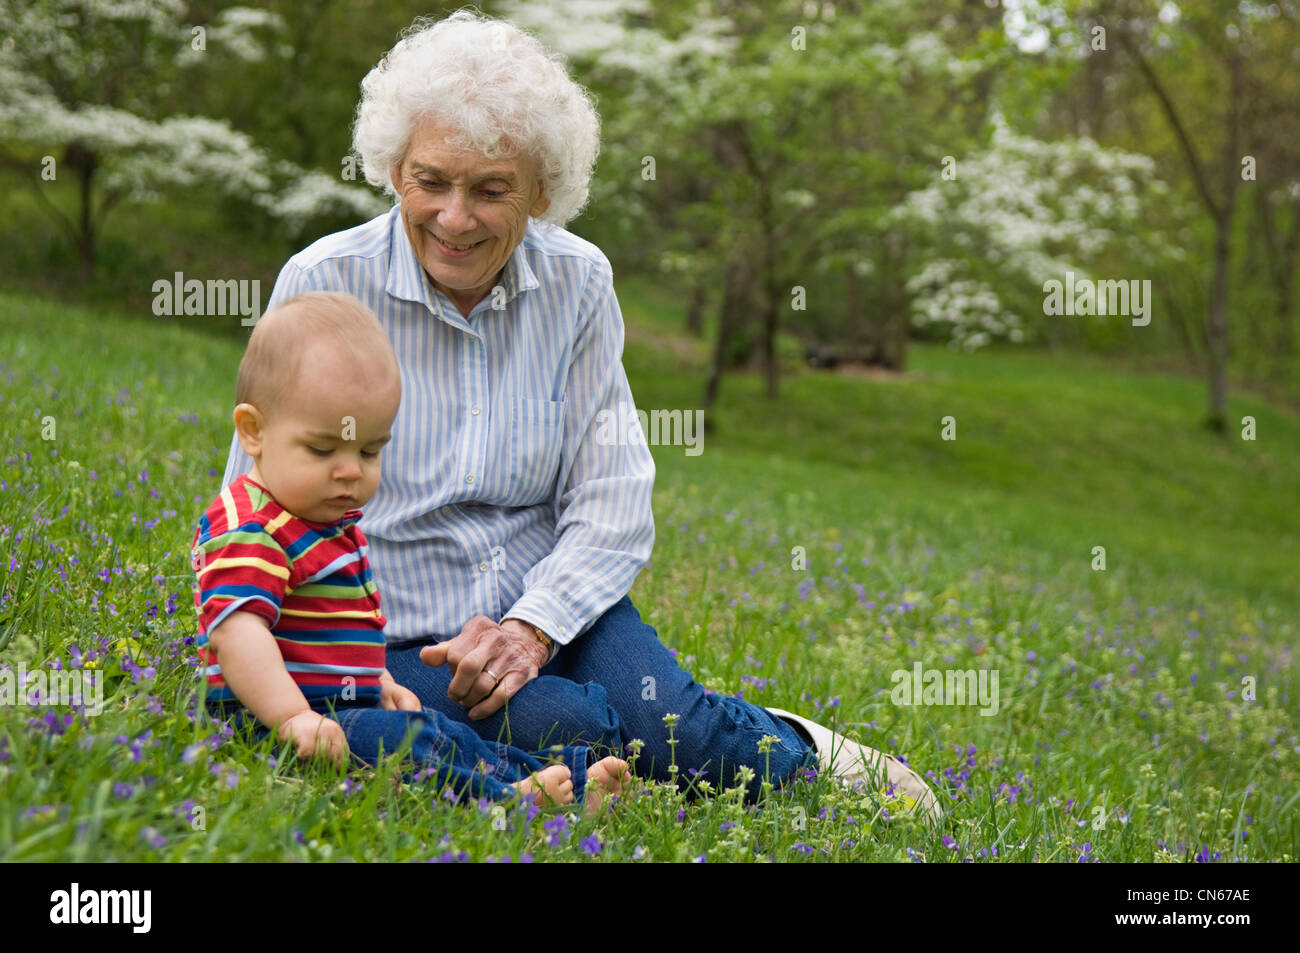 Great Grandmother and Great Grandson Outdoors on a Spring Day Stock Photo